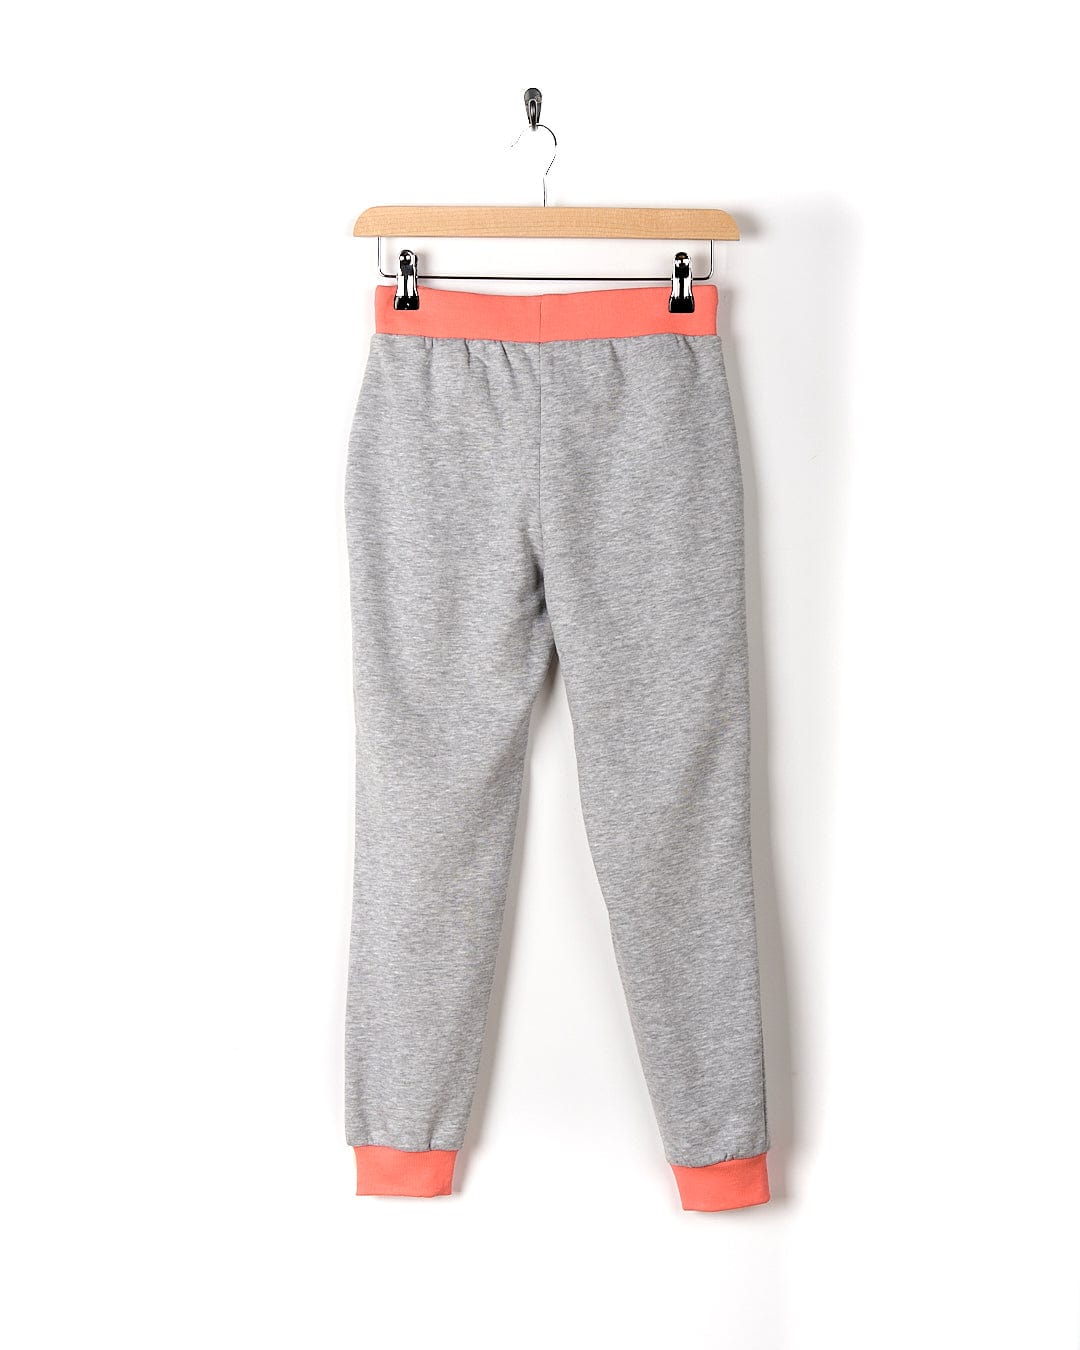 A Road Panel - Kids Jogger - Grey sweatpants from Saltrock hanging on a hanger.